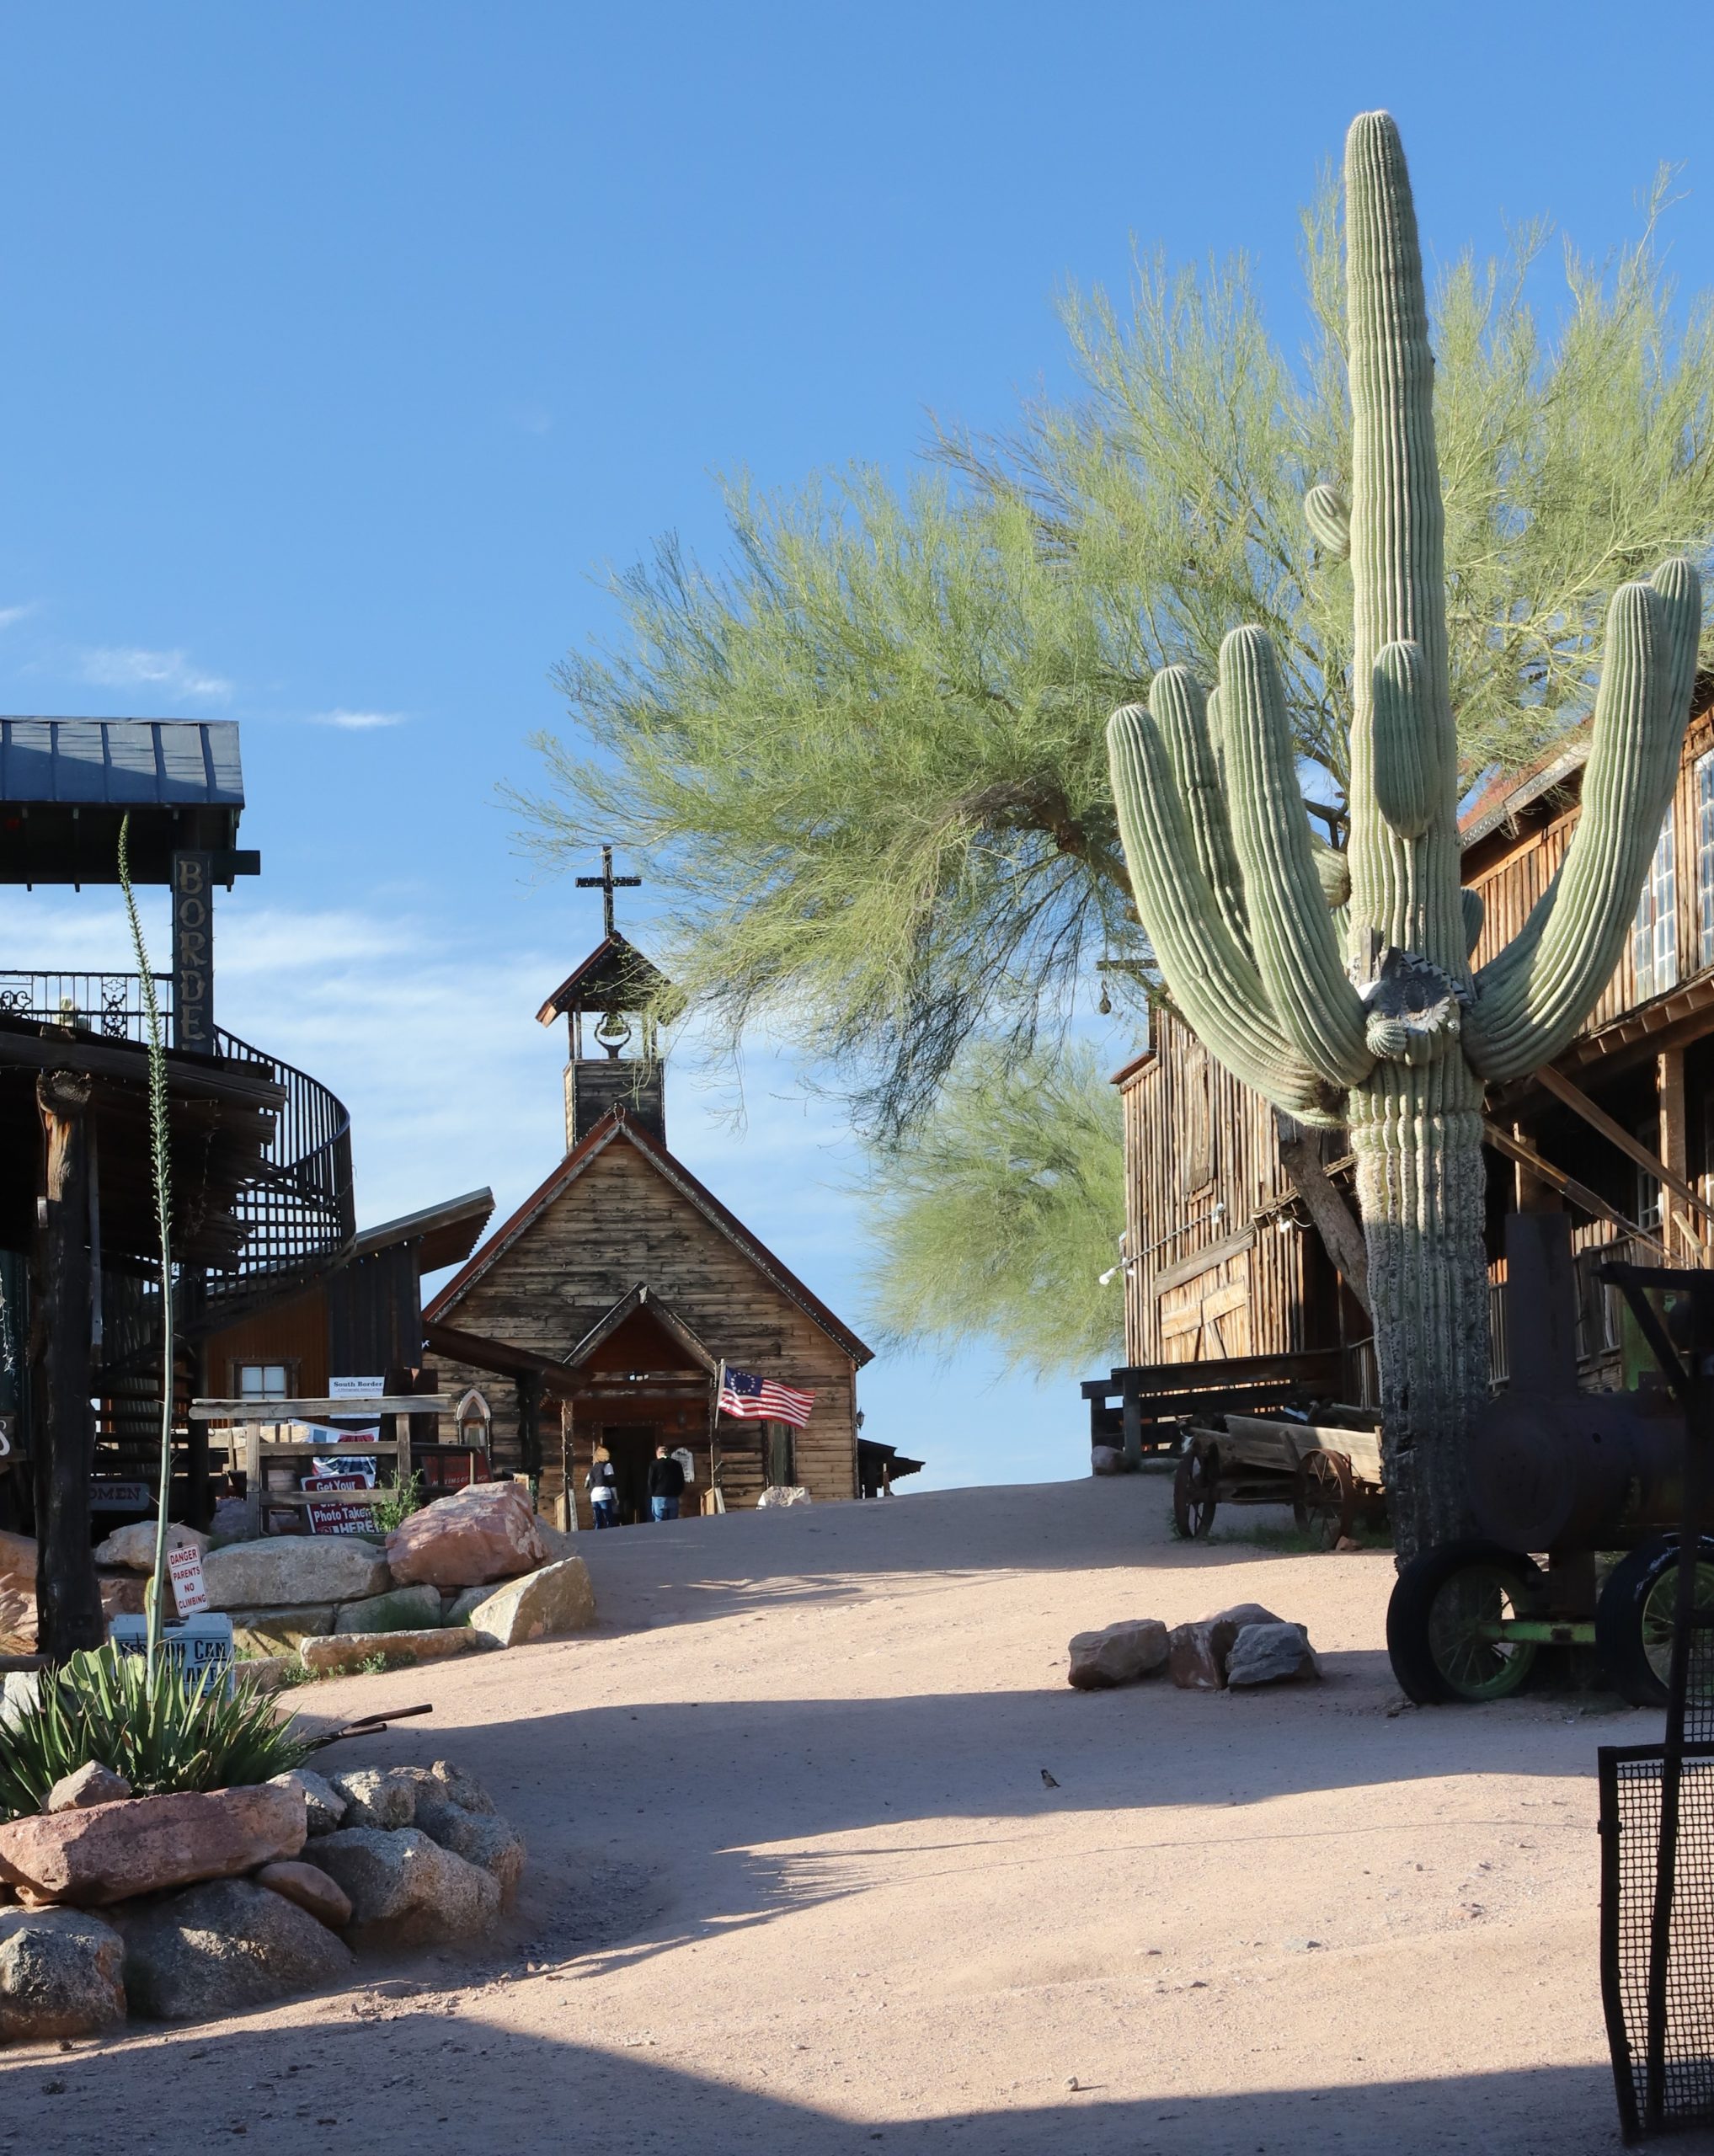 A picturesque desert scene features an old Western-style church with a cross on its roof in the background. In the foreground, a large cactus stands tall among several rustic wooden structures. The sky is clear and blue, with rocks scattered across the sandy ground.